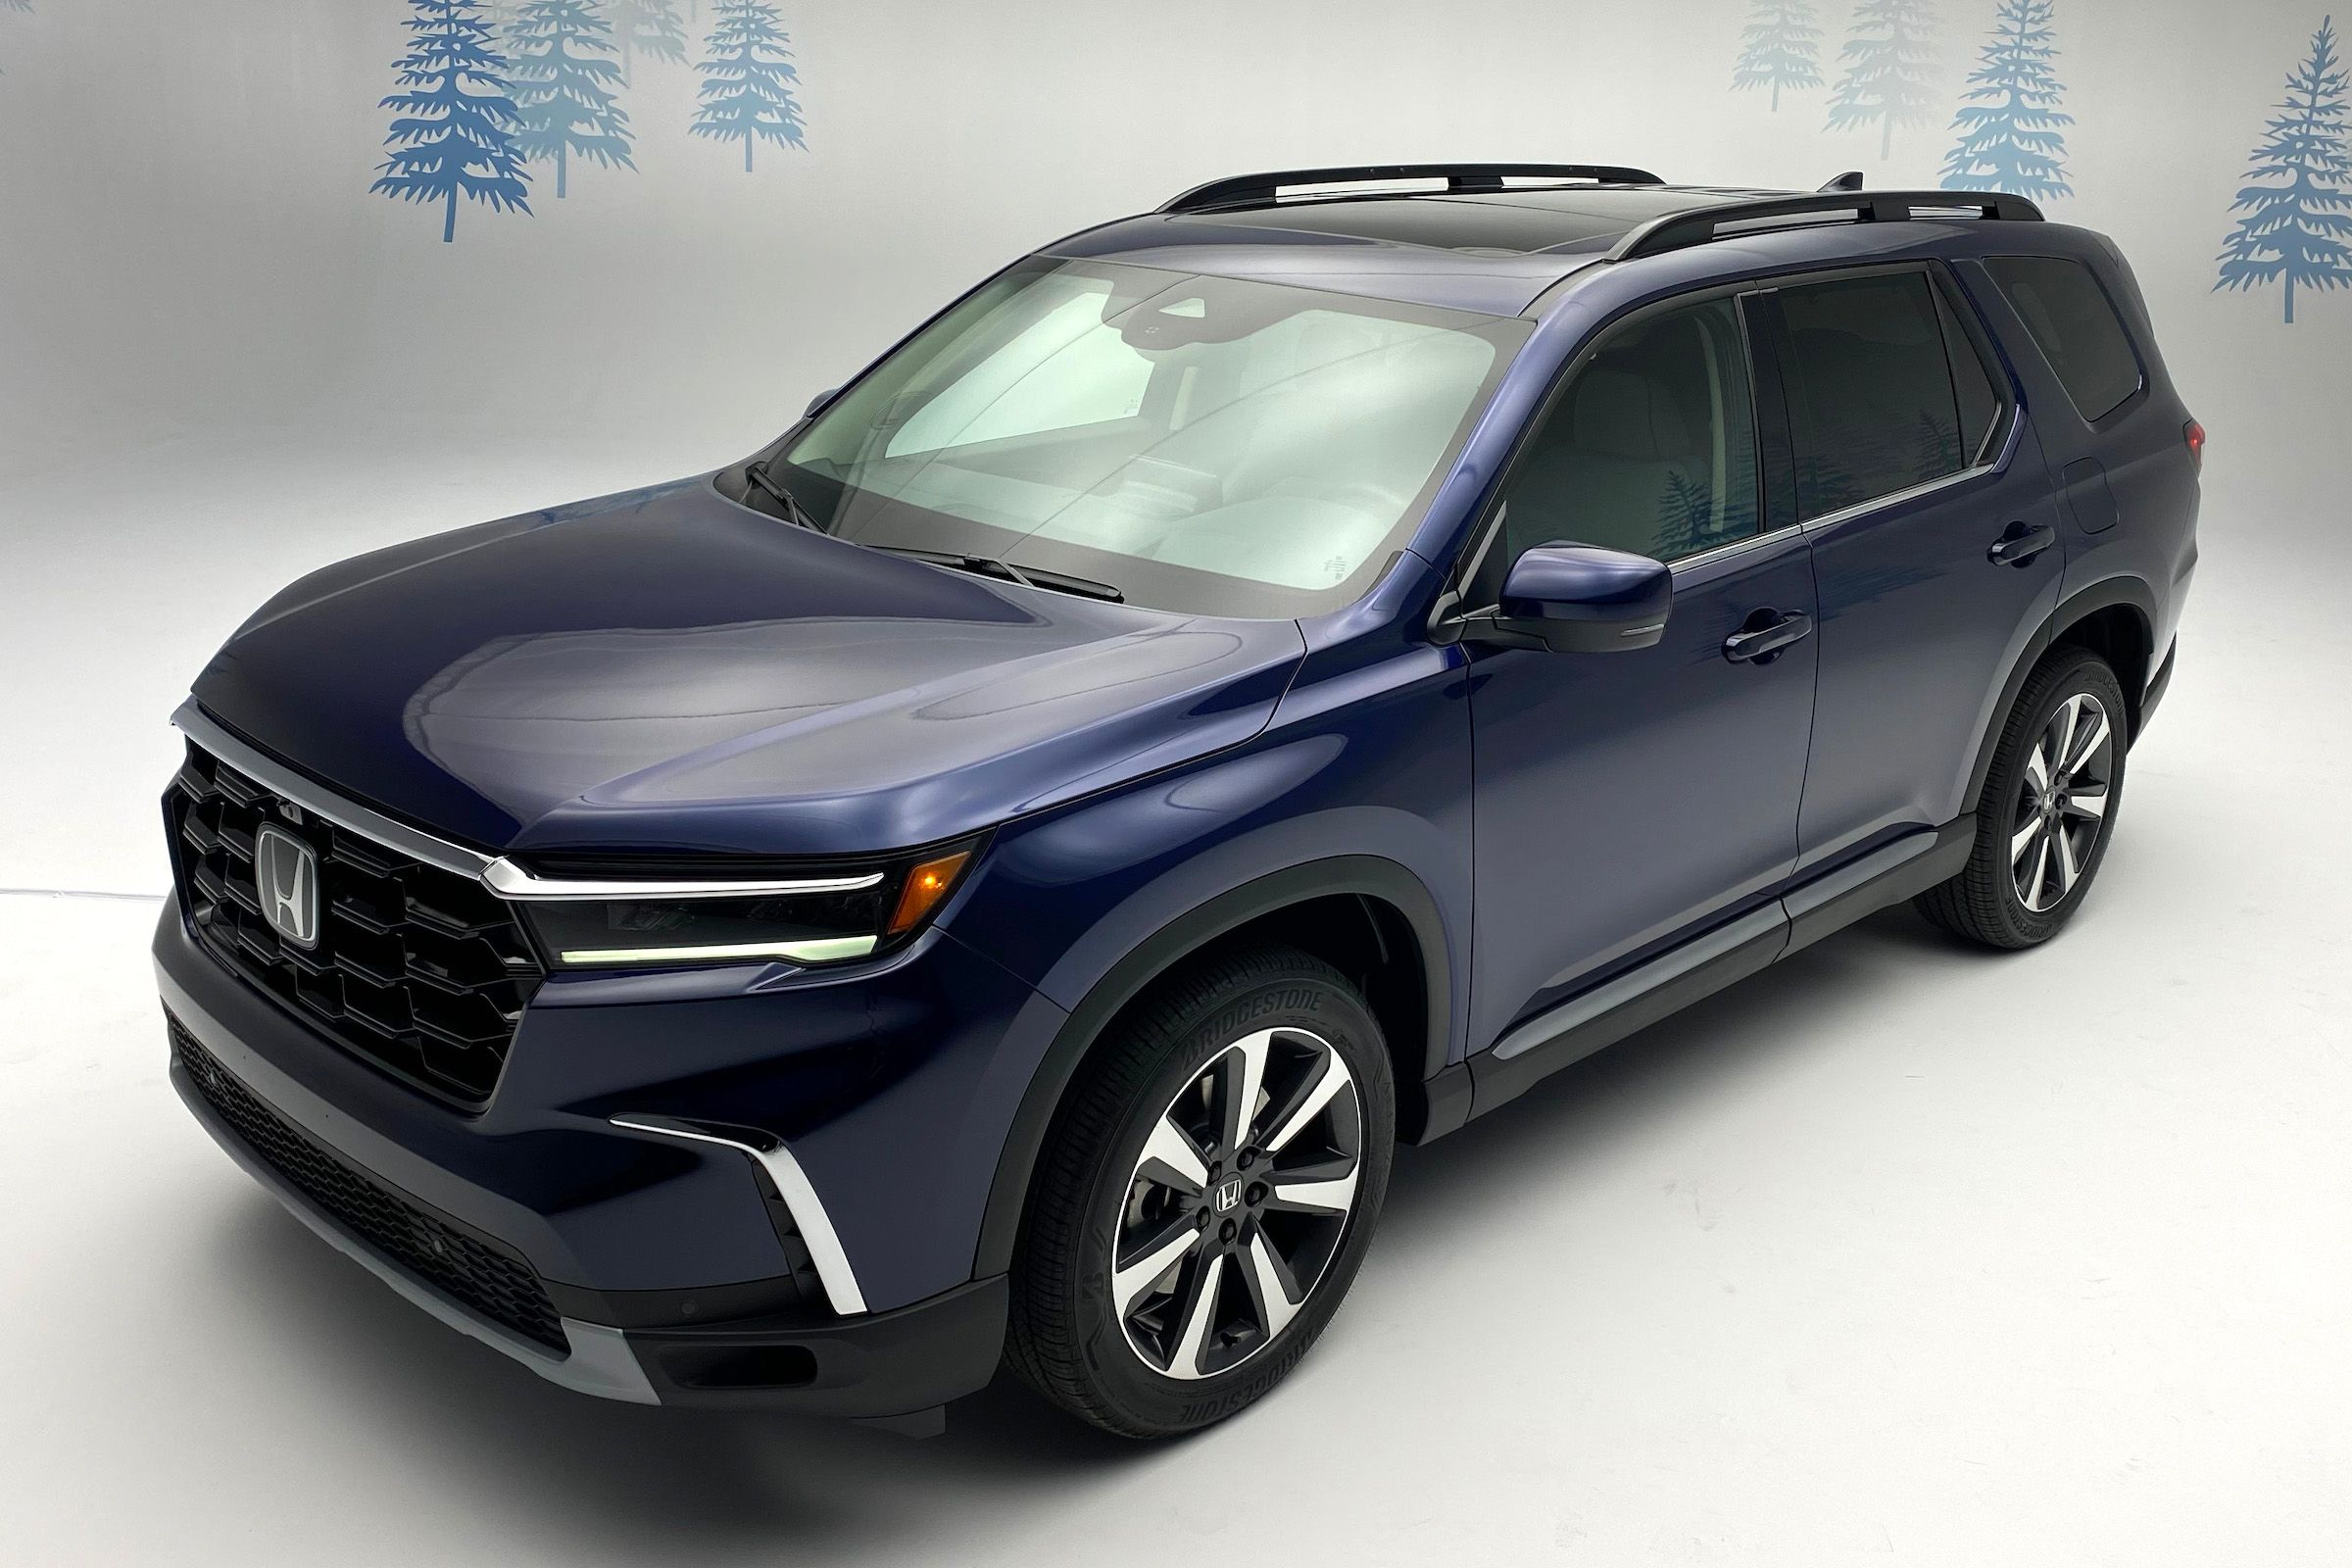 2023 Honda Pilot Elite blue with chrome accents and 20-inch wheels